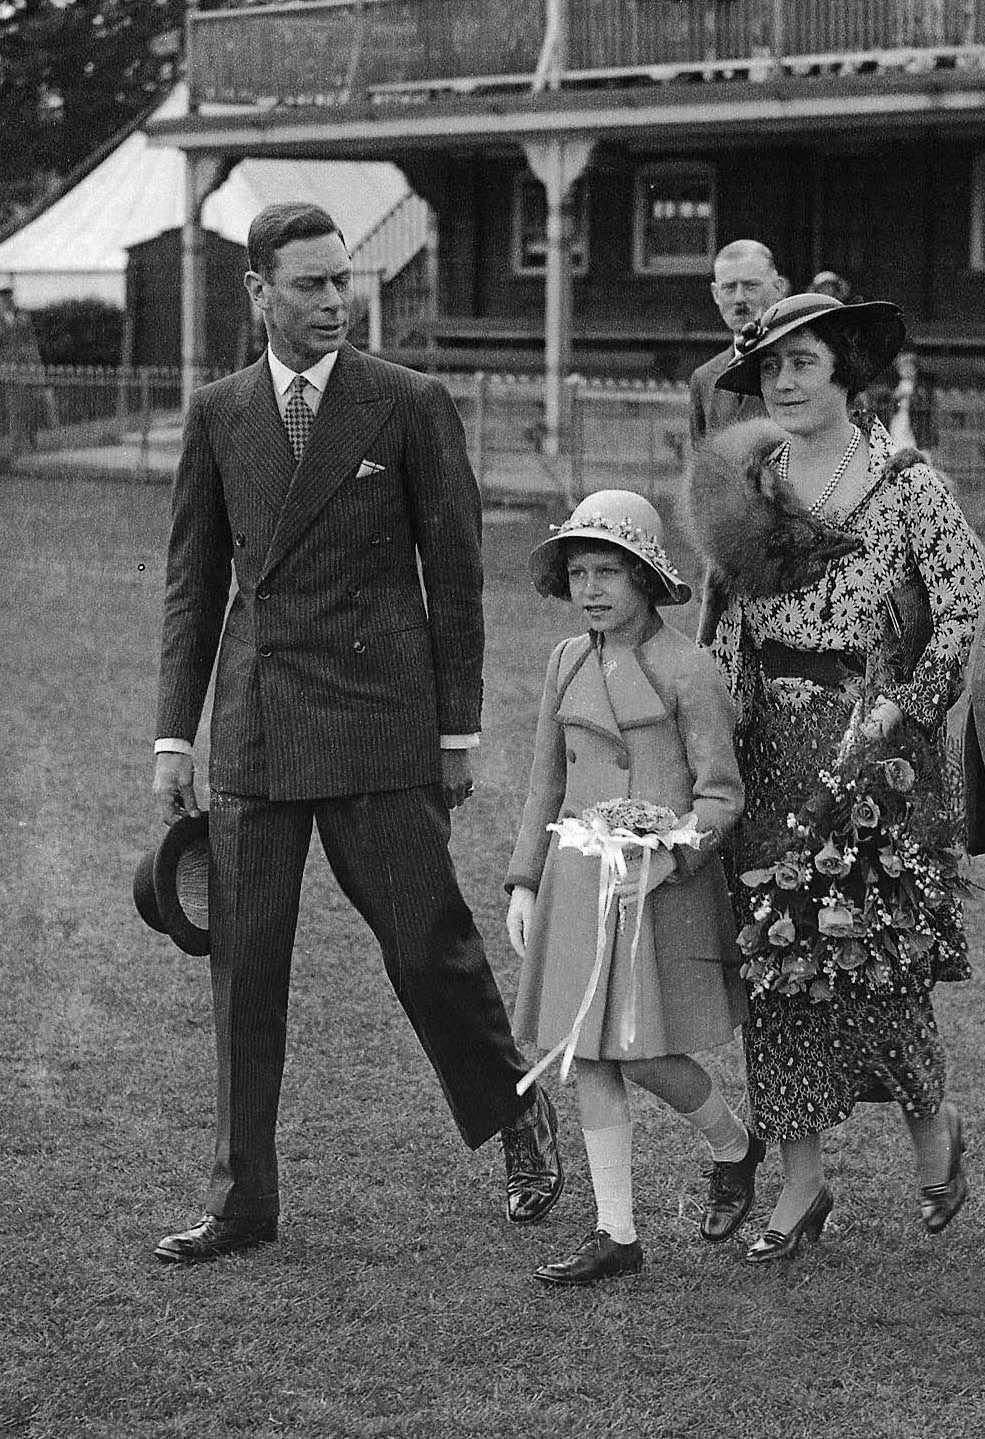 The Duke and Duchess of York, with Princess Elizabeth, later Queen Elizabeth II, at the Windsor Royal Horse Show, 1935